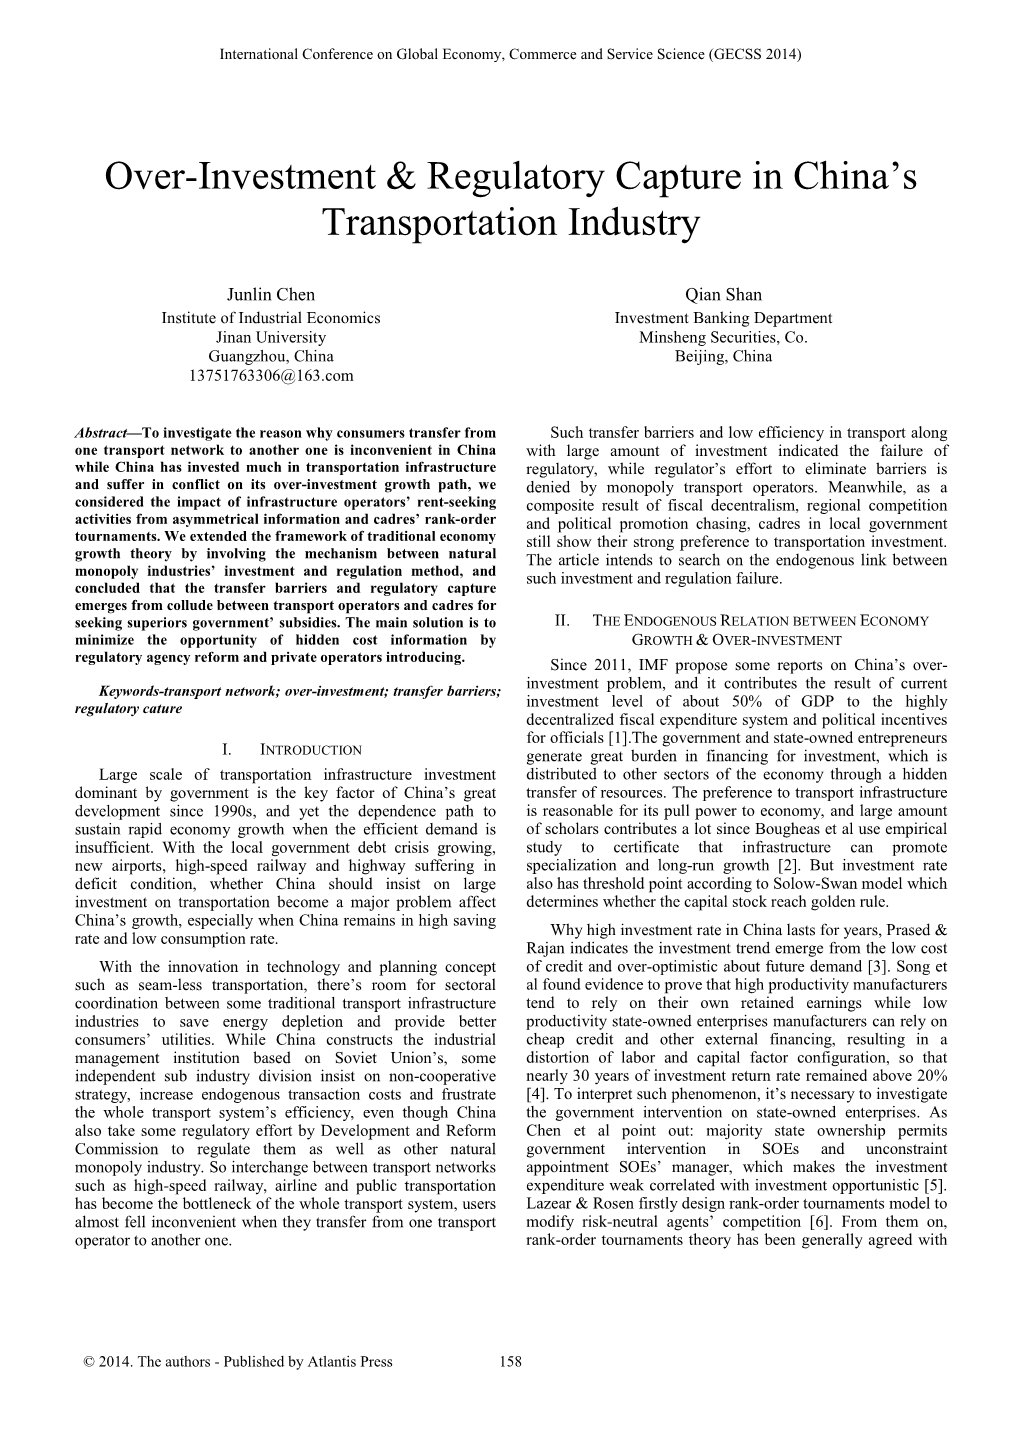 Over-Investment & Regulatory Capture in China's Transportation